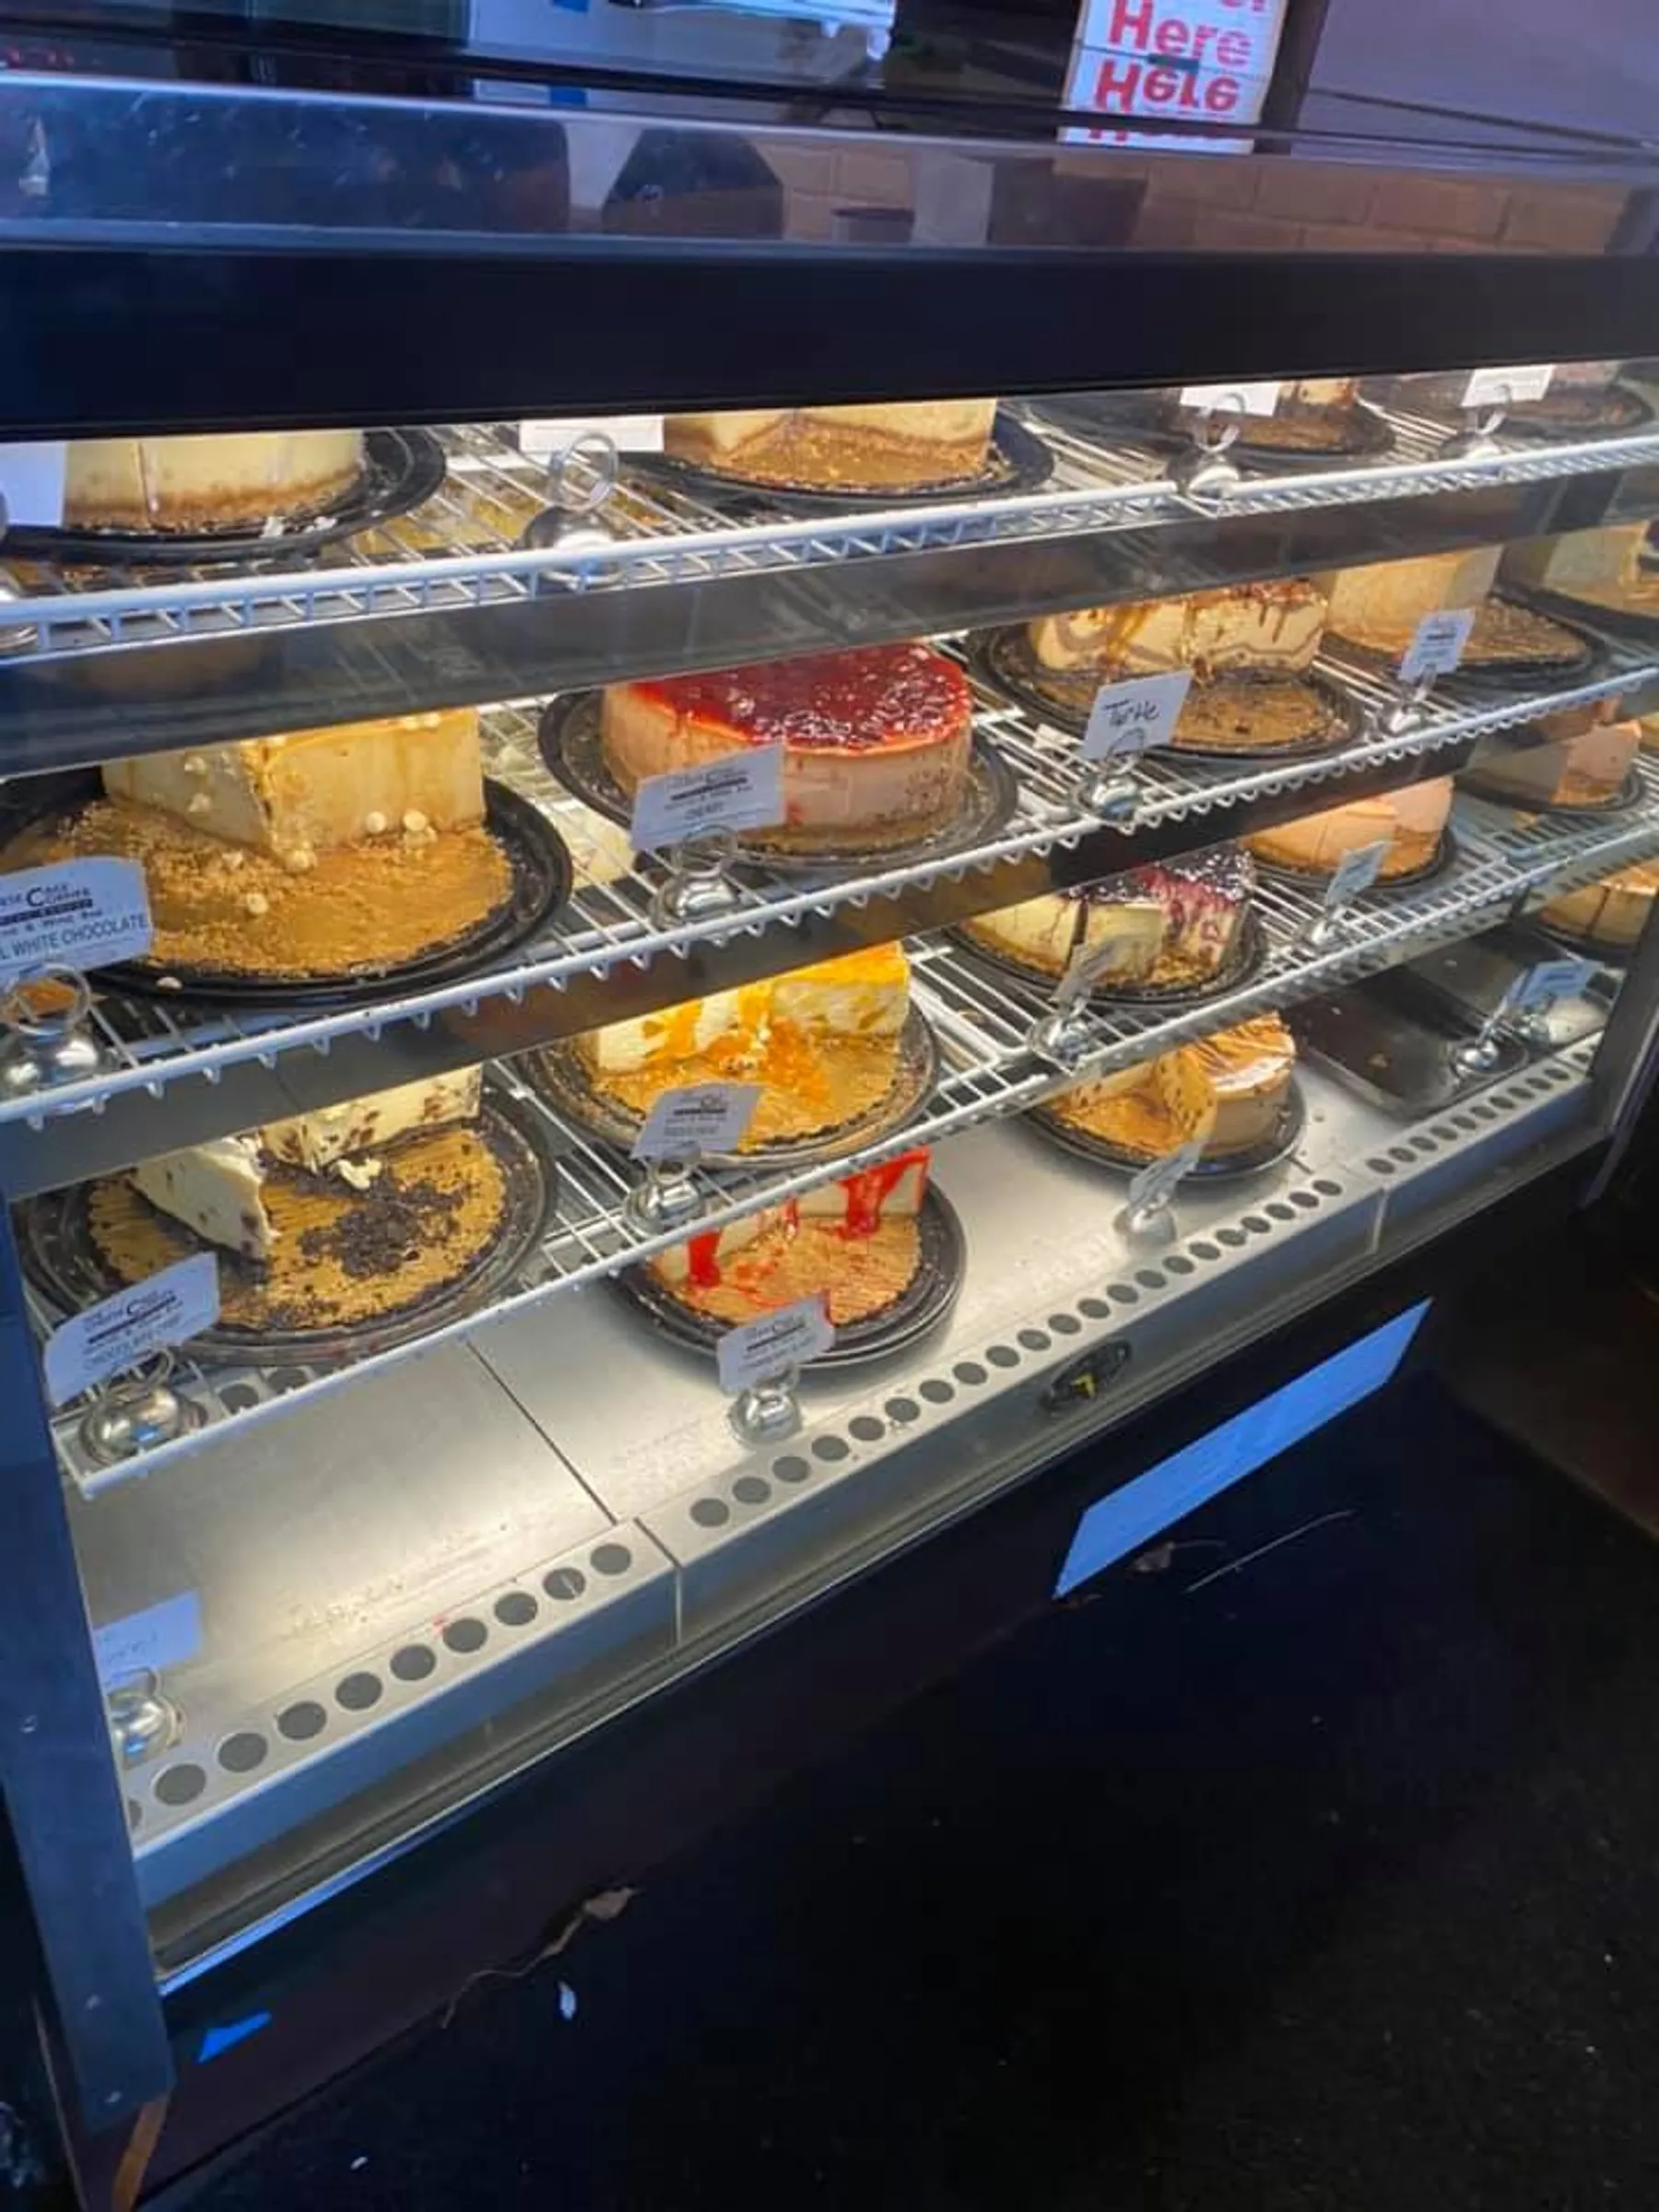 Assorted cakes on display in a bakery case, including cheesecakes and layered cakes, ideal for late night bites, with price tags visible.